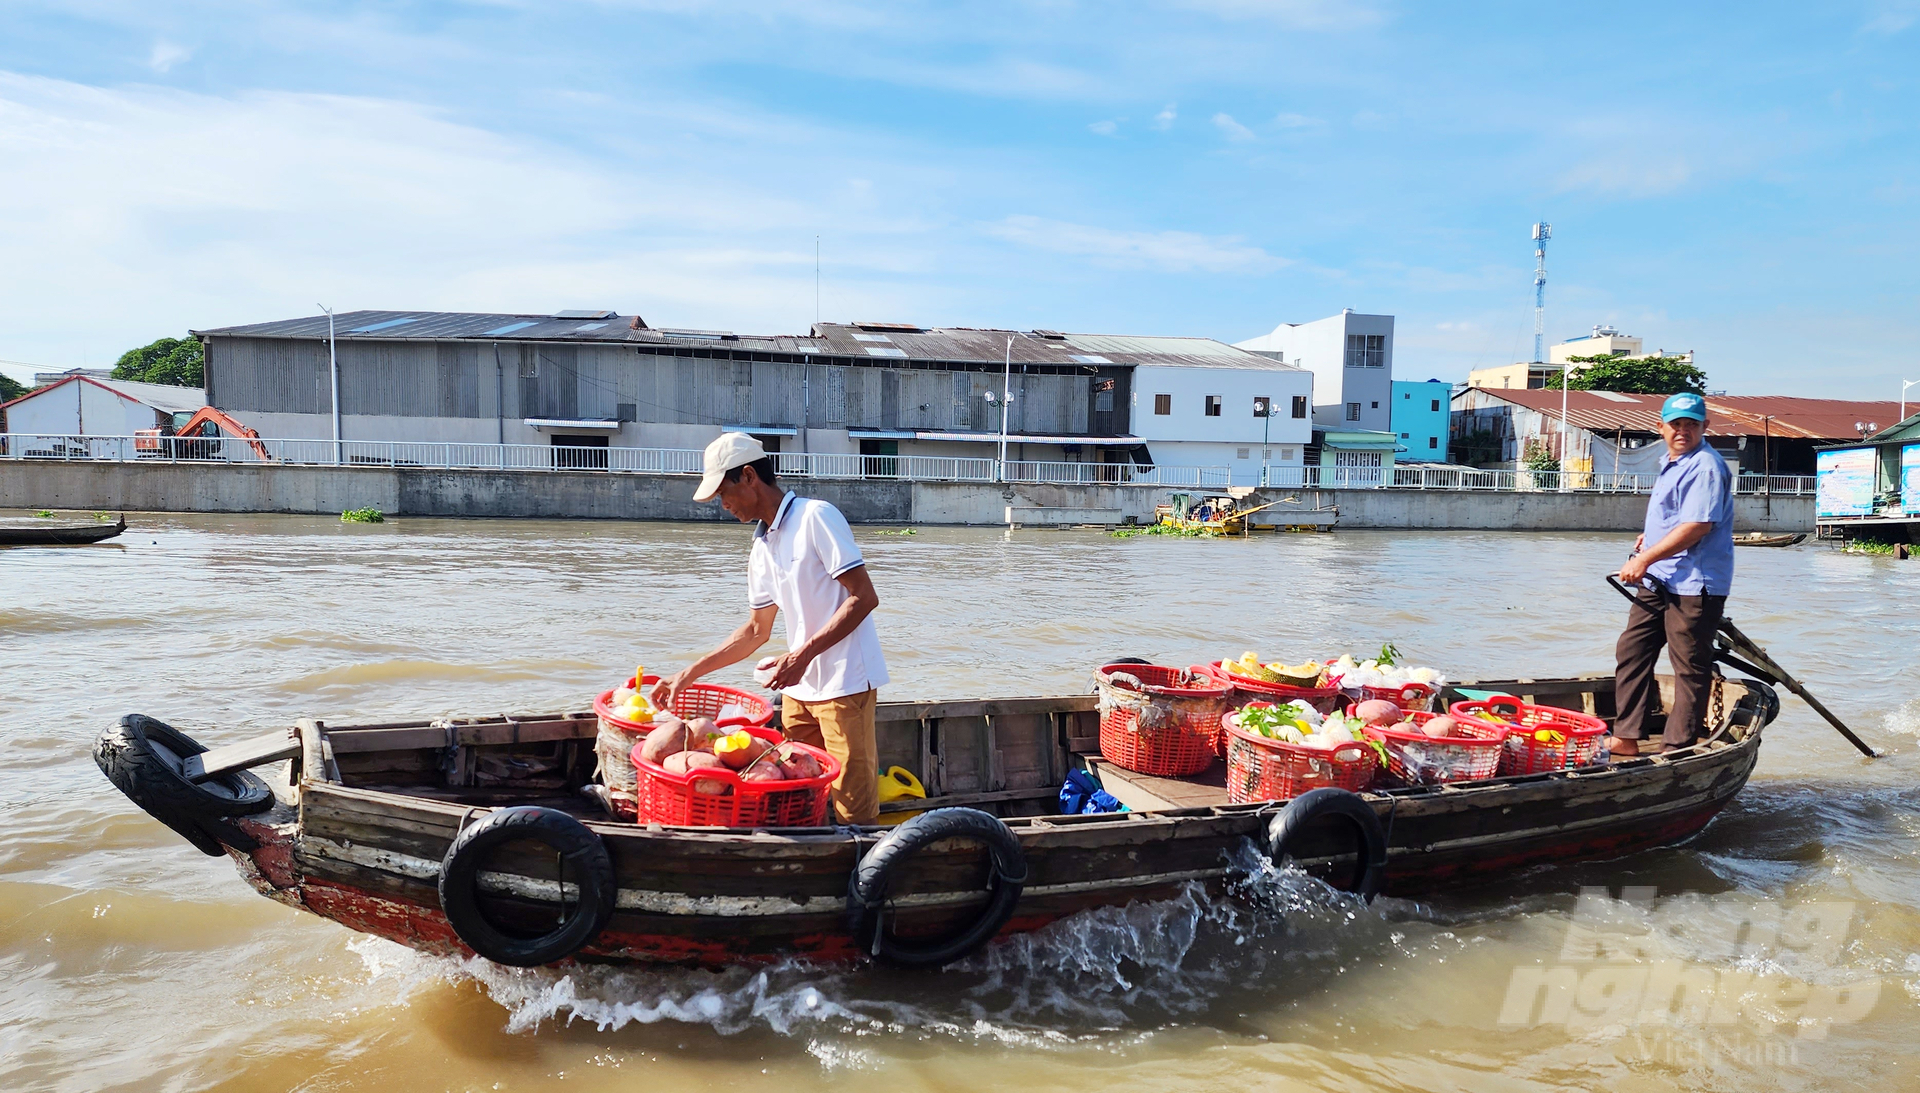 The system of canals and canals connects localities in the Mekong Delta. Photo: Kim Anh.